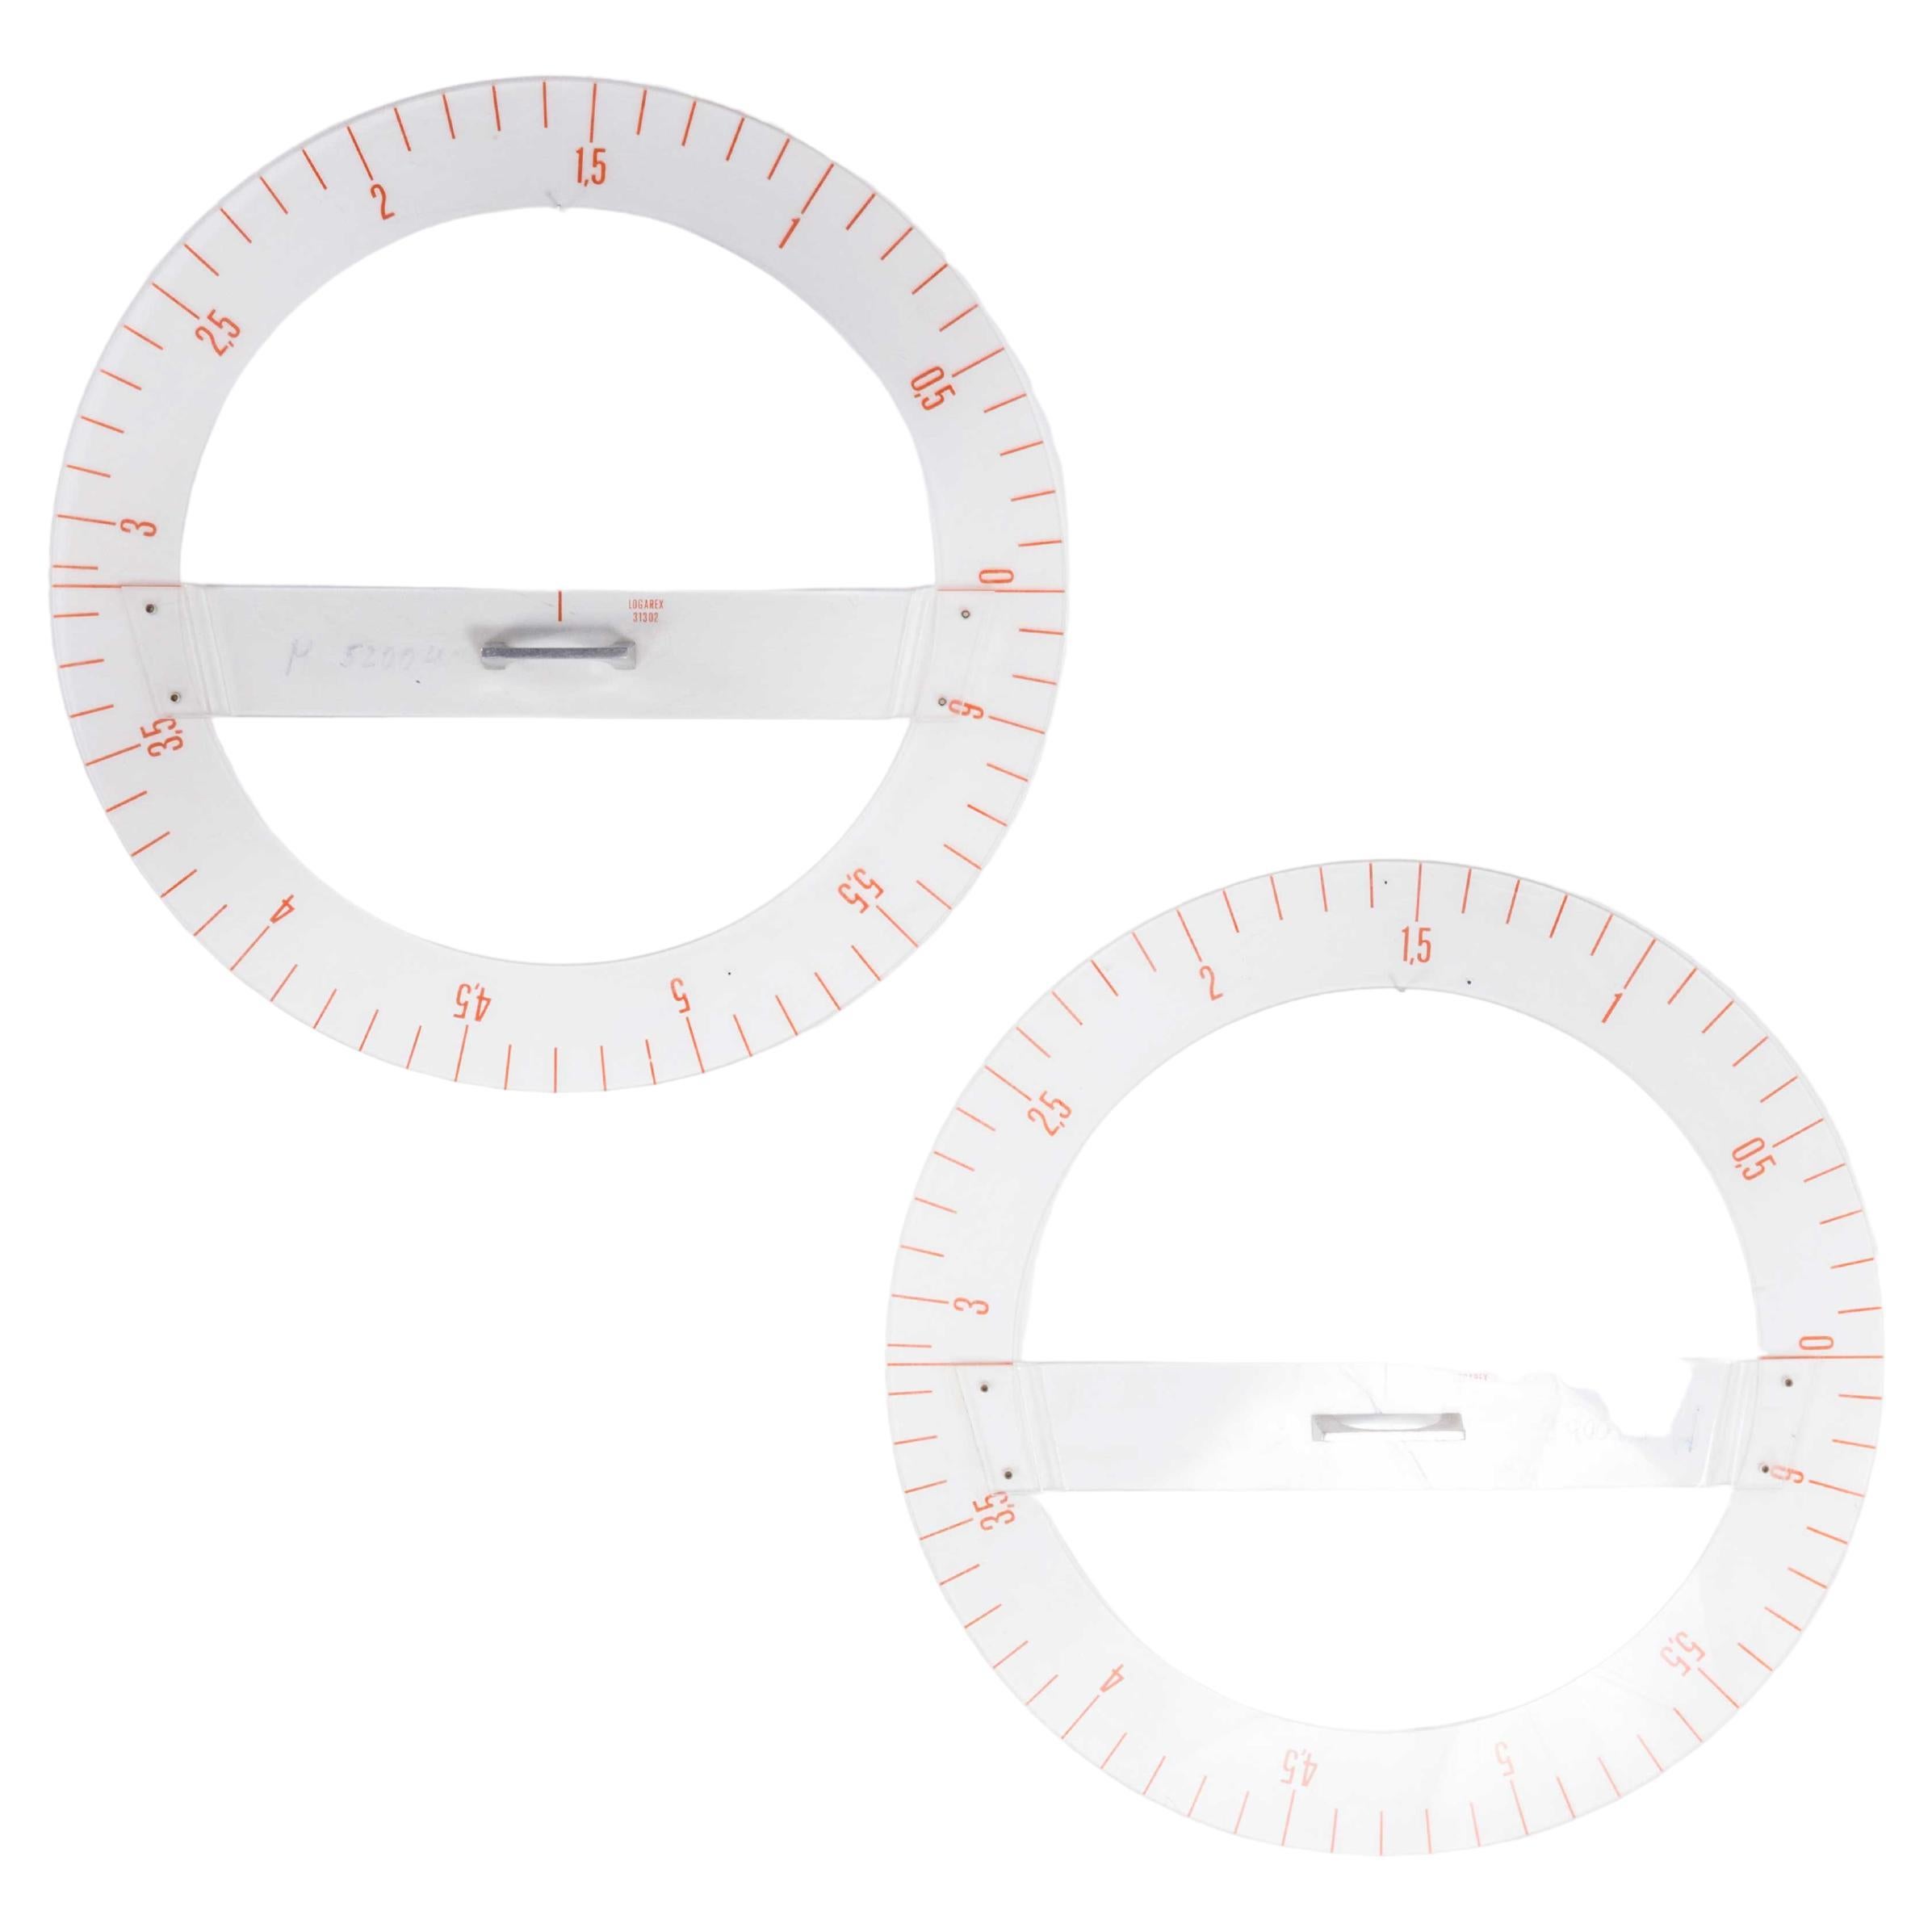 Pair of Clear Perspex Circular Stationery Shapes